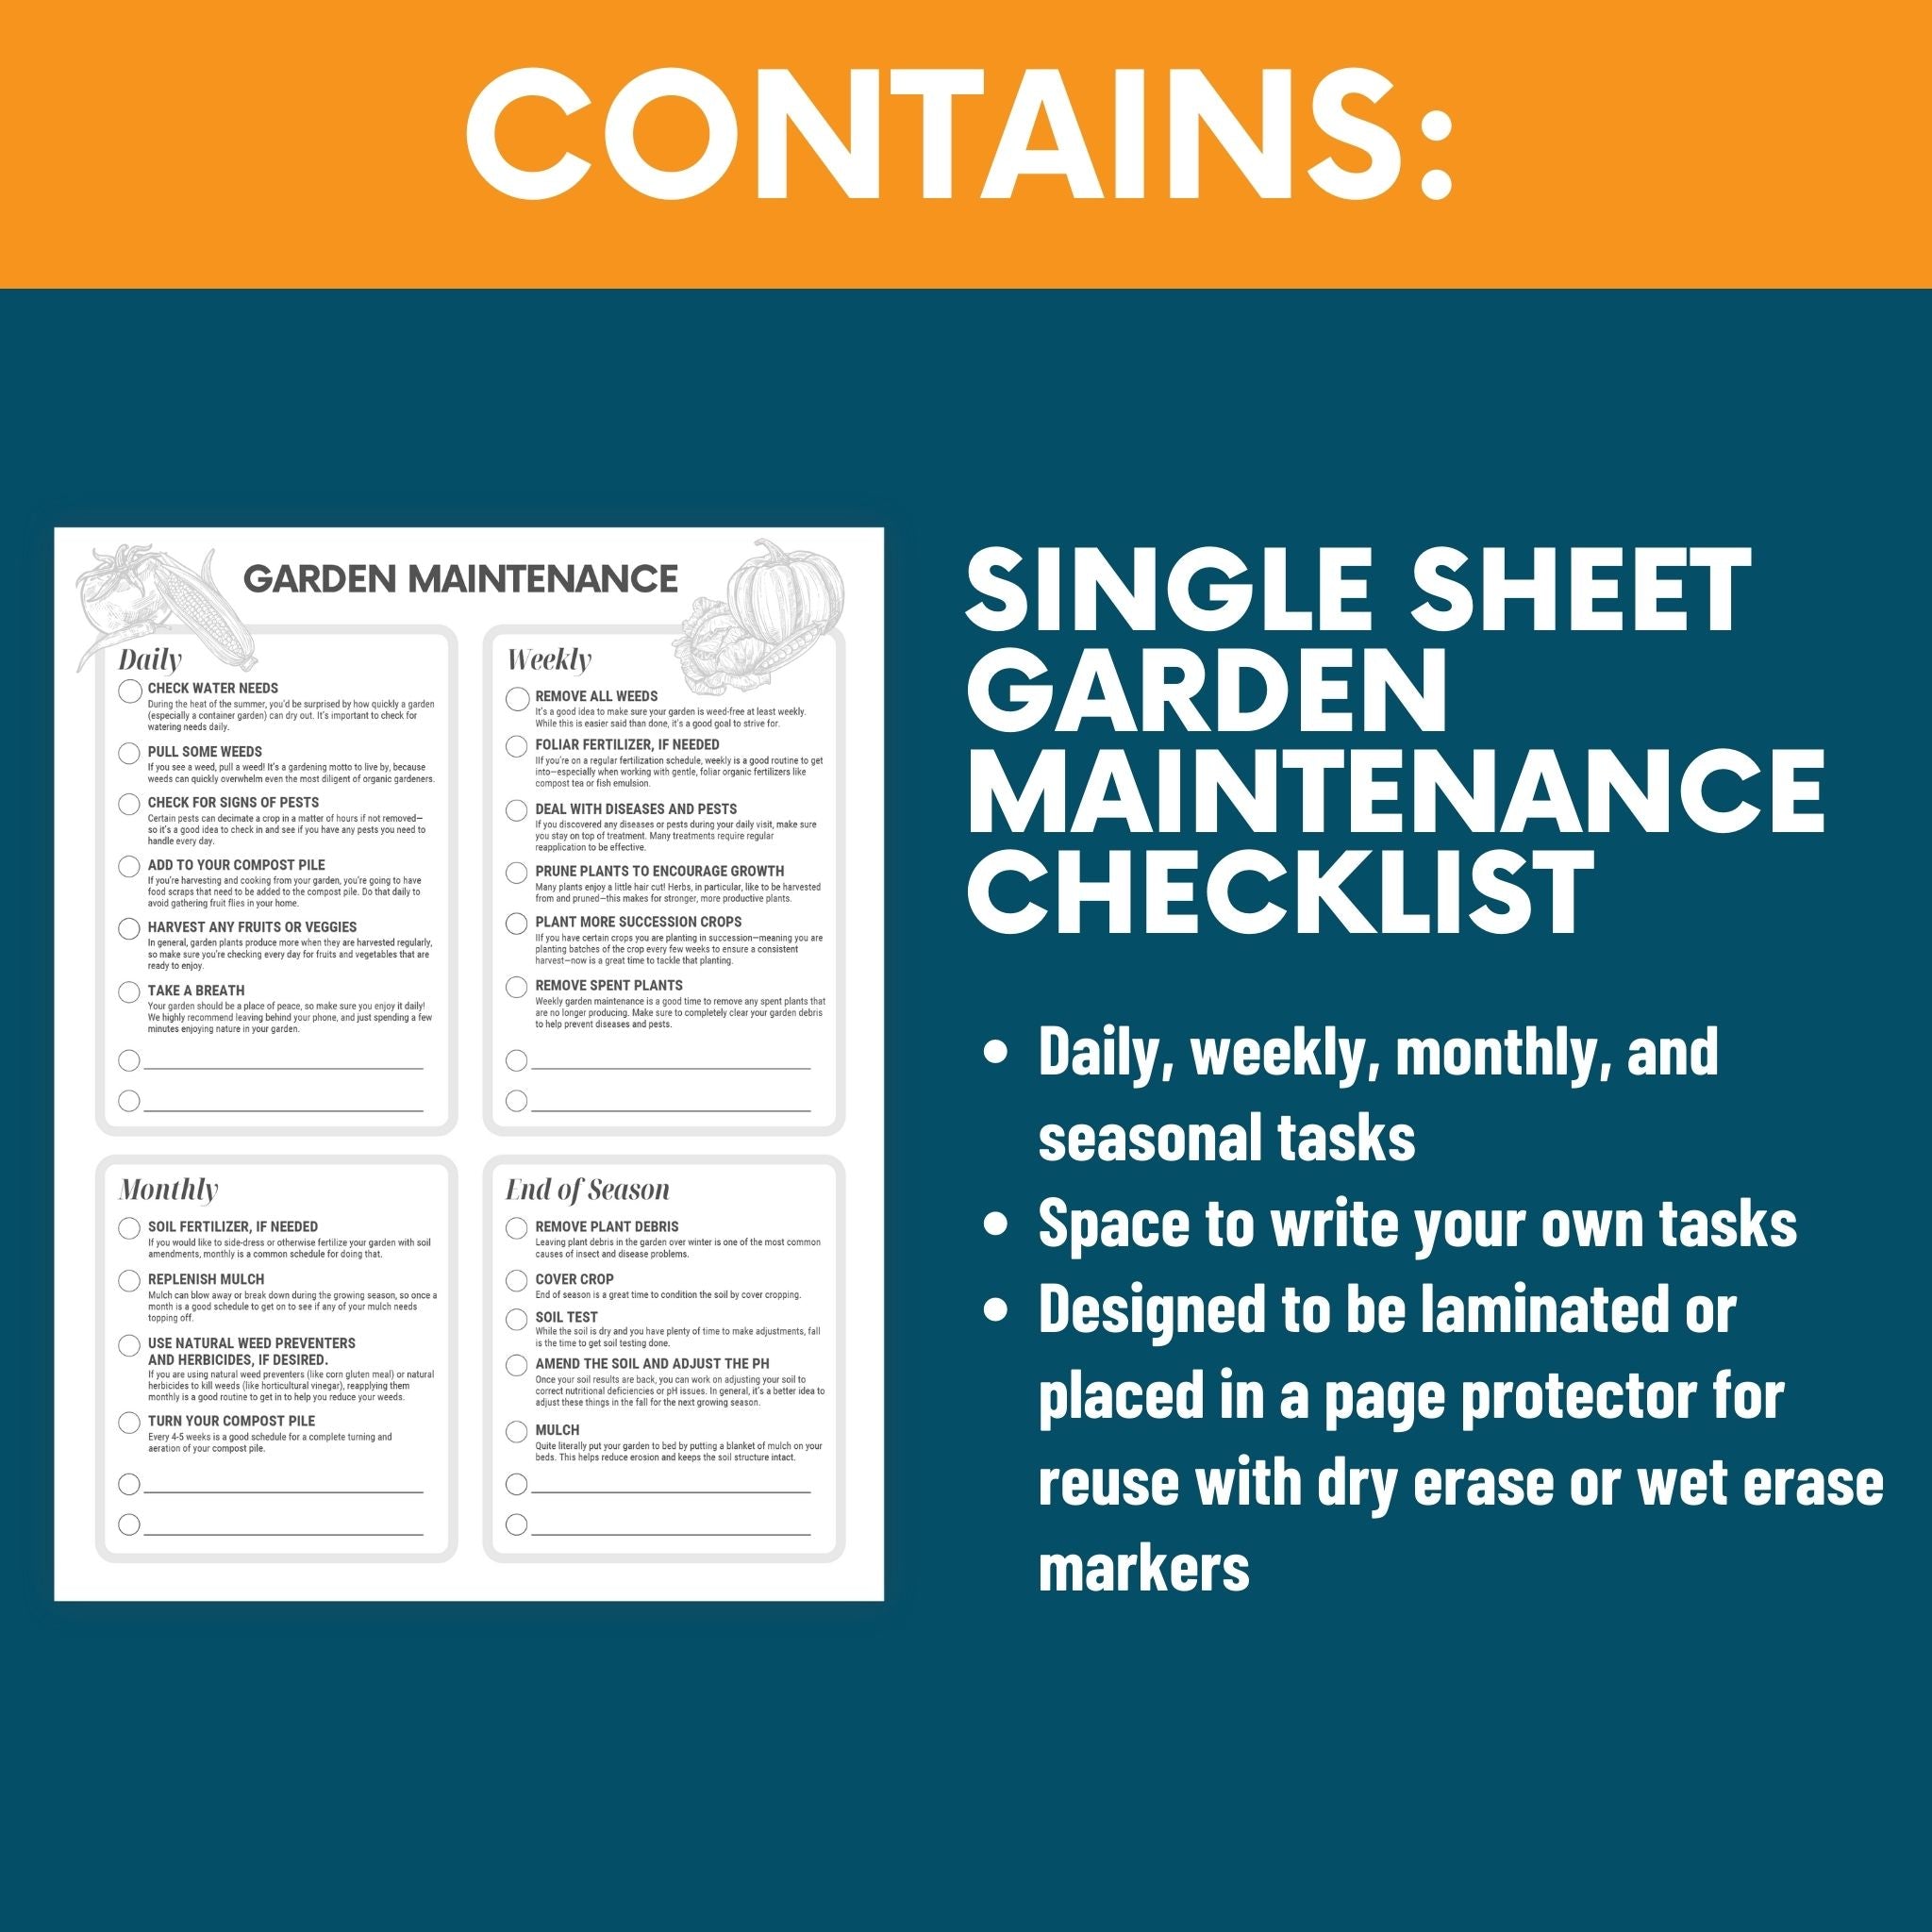 Details for the garden maintenance checklist. Text reads: "Contains: Single Sheet Garden Maintenance Checklist. Daily, weekly, monthly, seasonal tasks. Space to write your own tasks. Designed to be laminated or placed in a page protector for reuse with dry erase or wet erase markers."